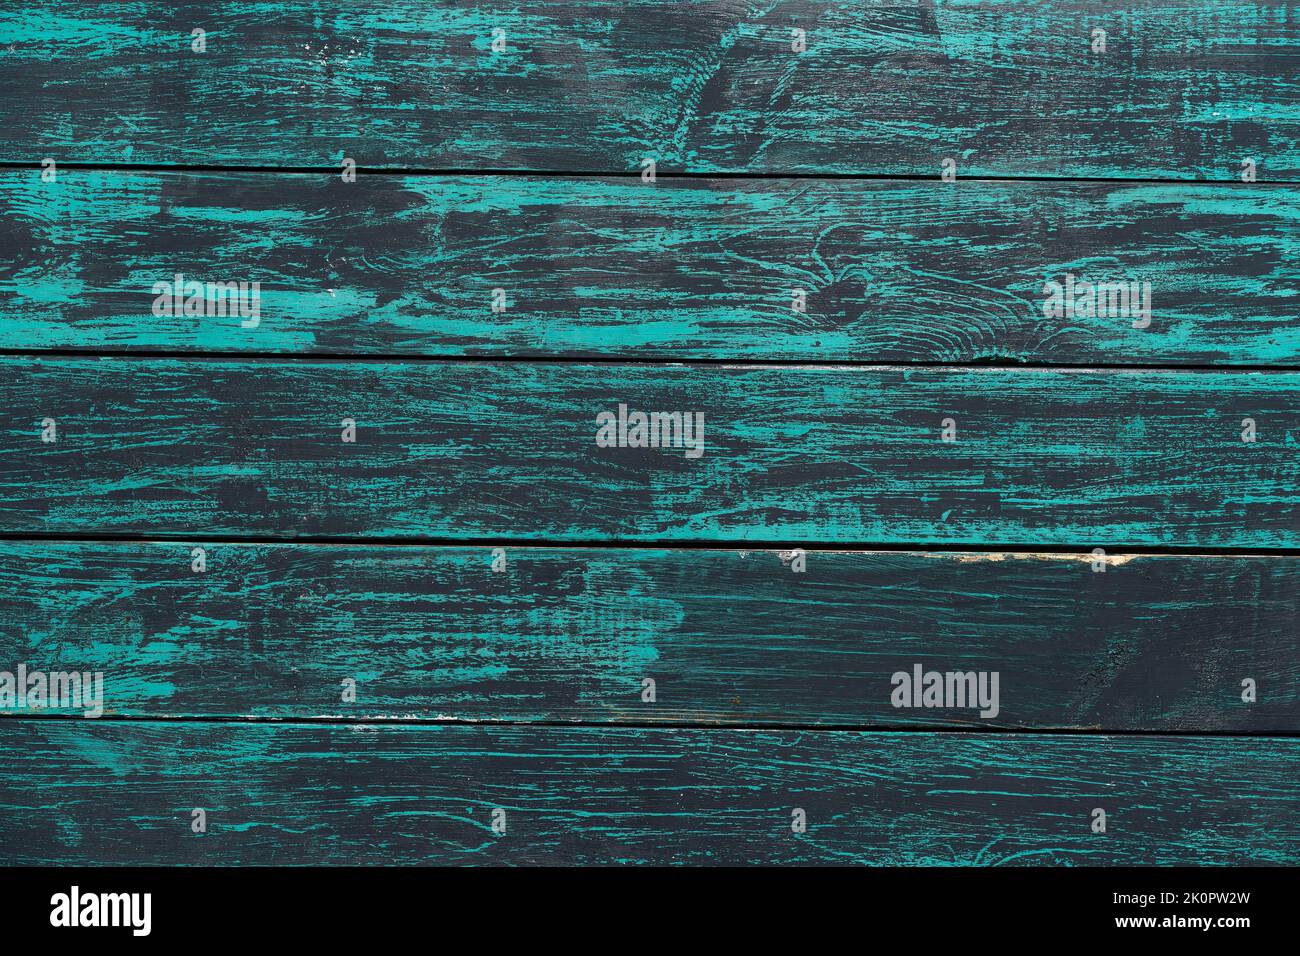 Natural scuffed patterns on the wall. Old Grand wooden textured background. Blue boards old design. Turquoise color. Painted timber. Horizontal board. Vintage wood texture blue panel. Stock Photo